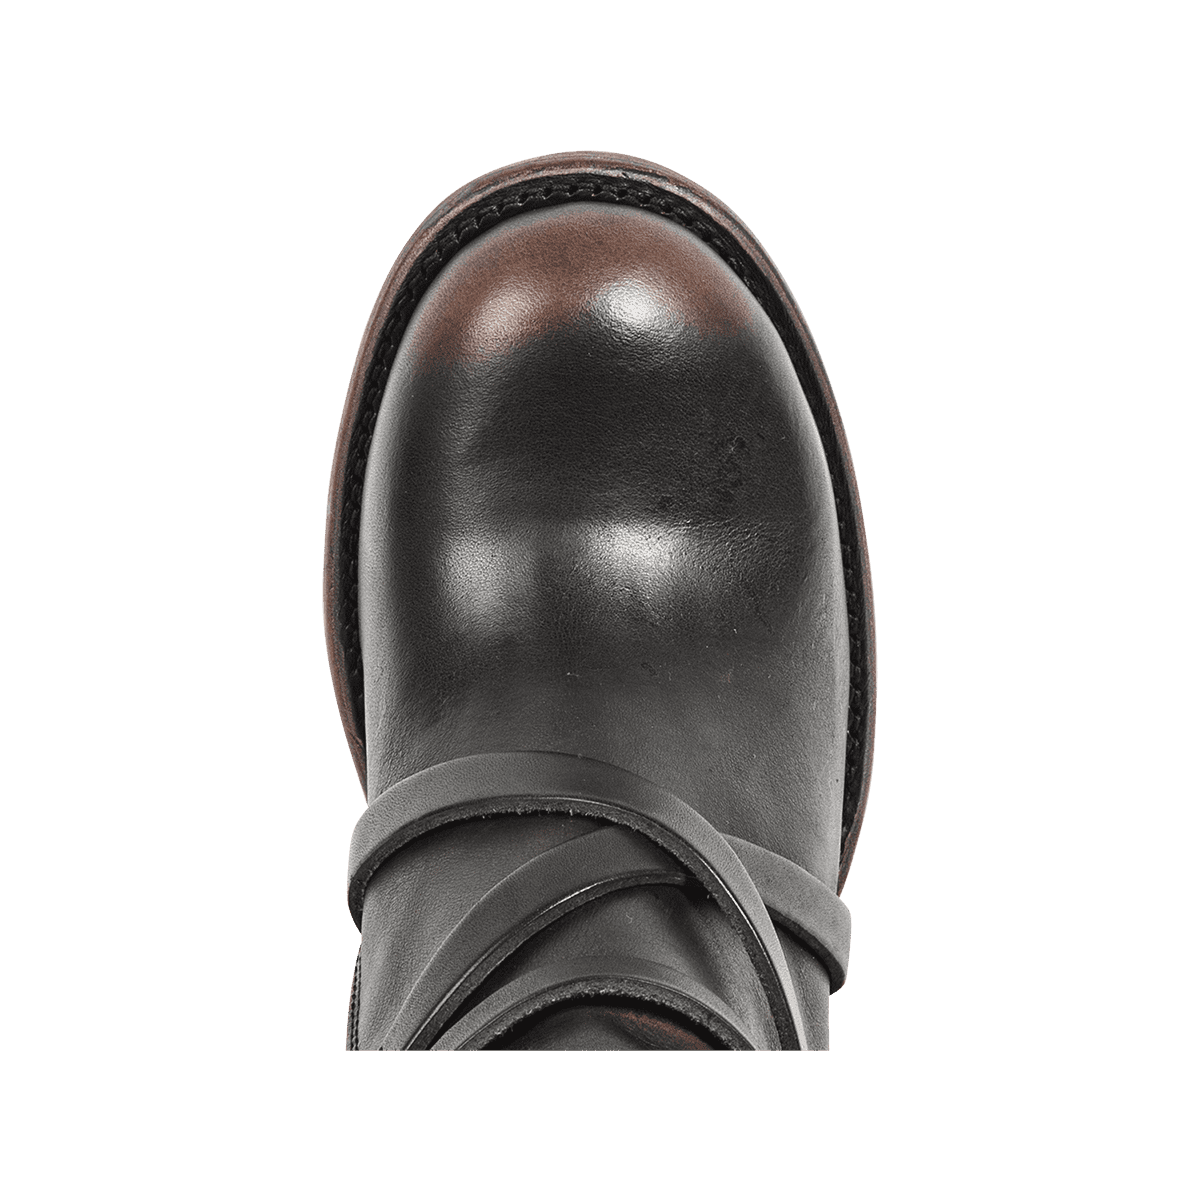 Top view showing round toe and leather ankle straps on FREEBIRD women's Baker black boot 